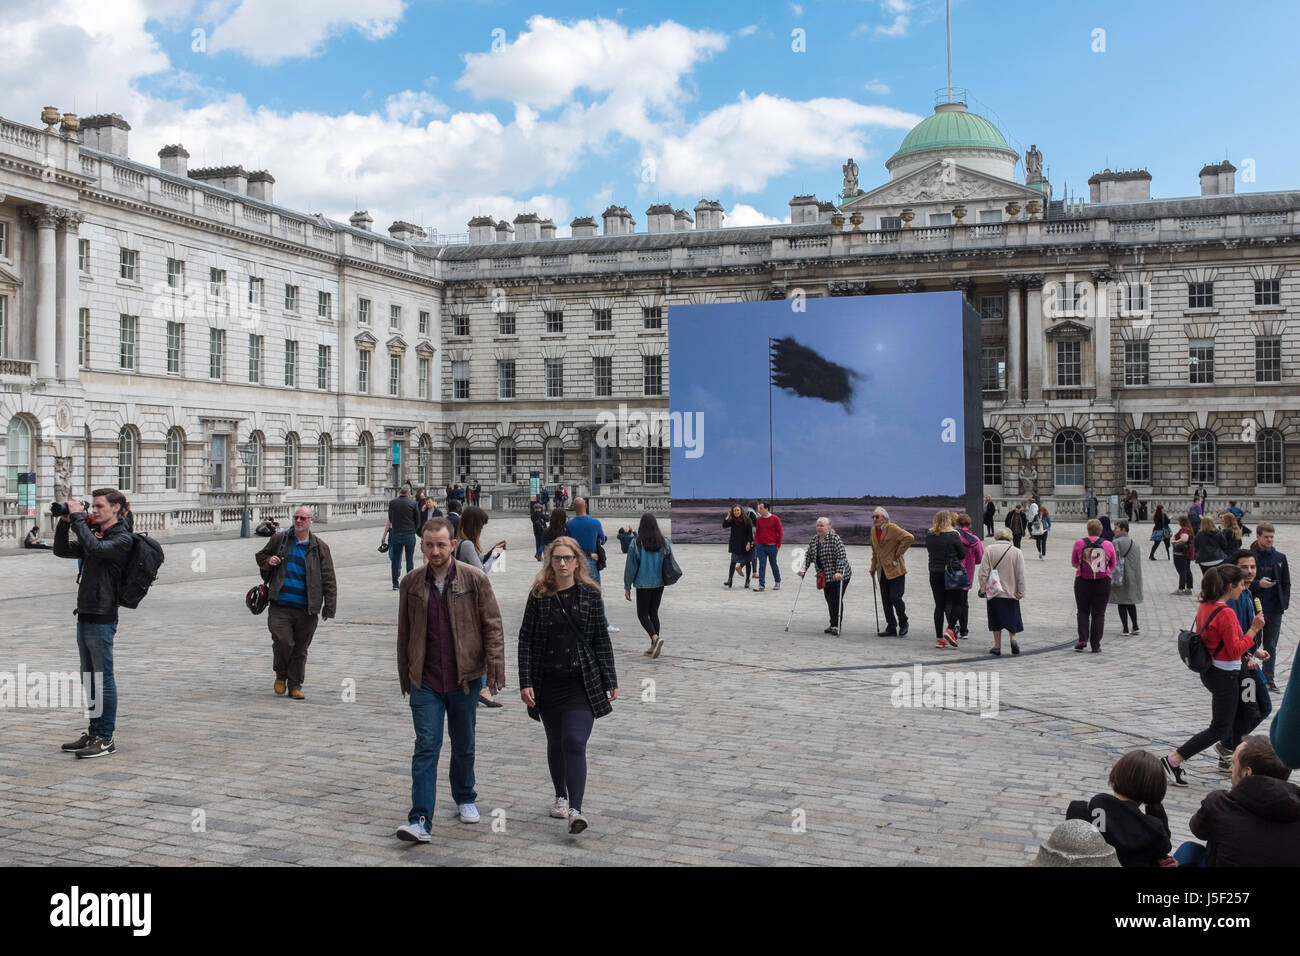 John Gerrard's Western Flag art installation at The Courtyard at Somerset House in the Strand, London Stock Photo